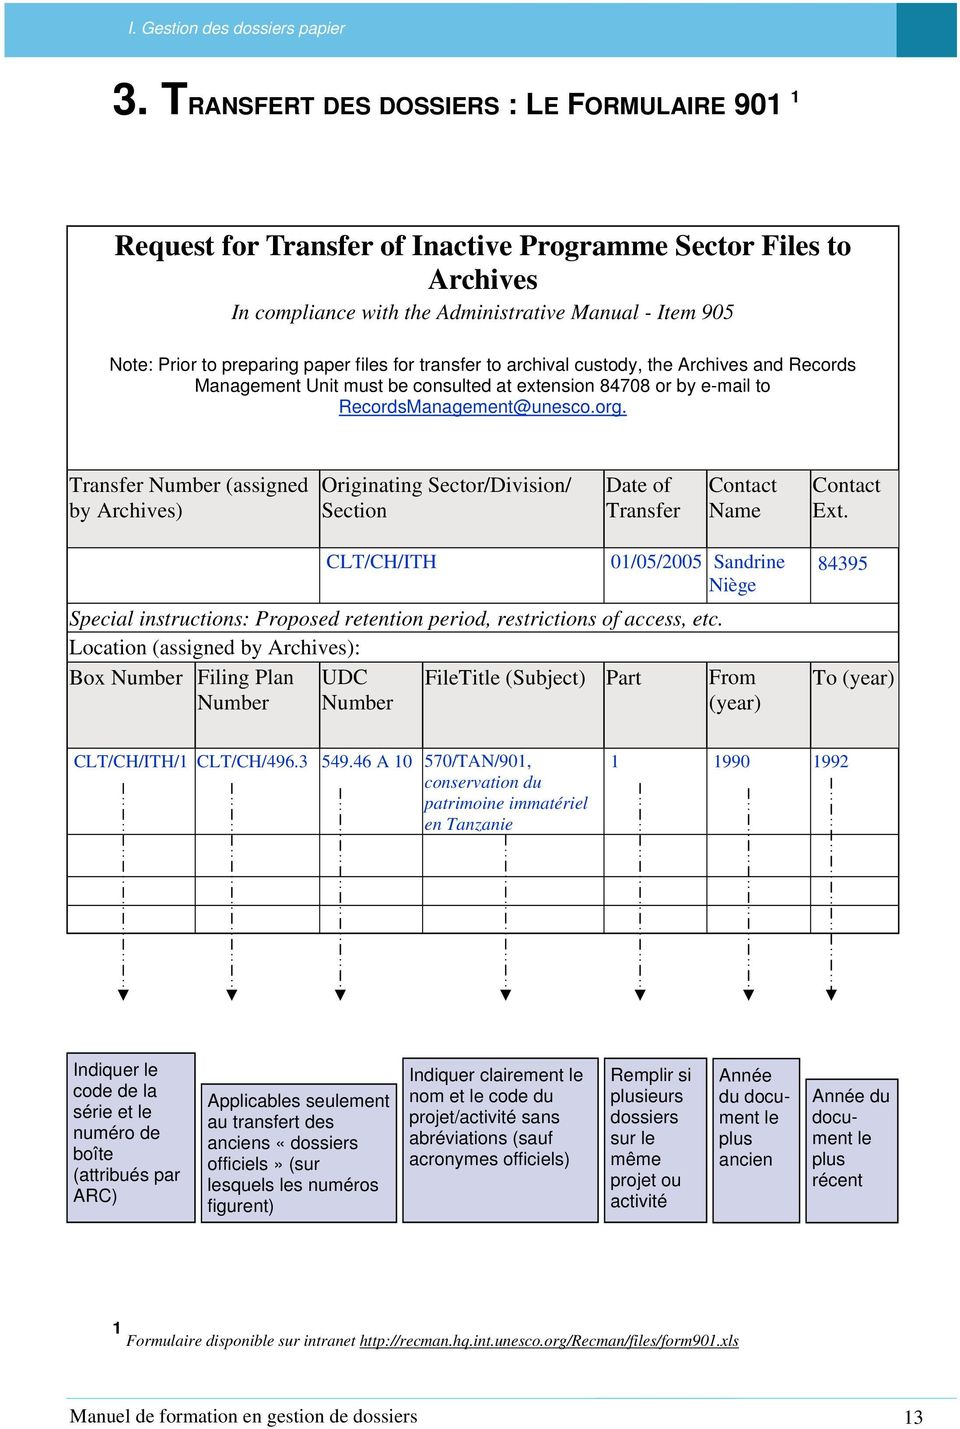 files for transfer to archival custody, the Archives and Records Management Unit must be consulted at extension 84708 or by e-mail to RecordsManagement@unesco.org.